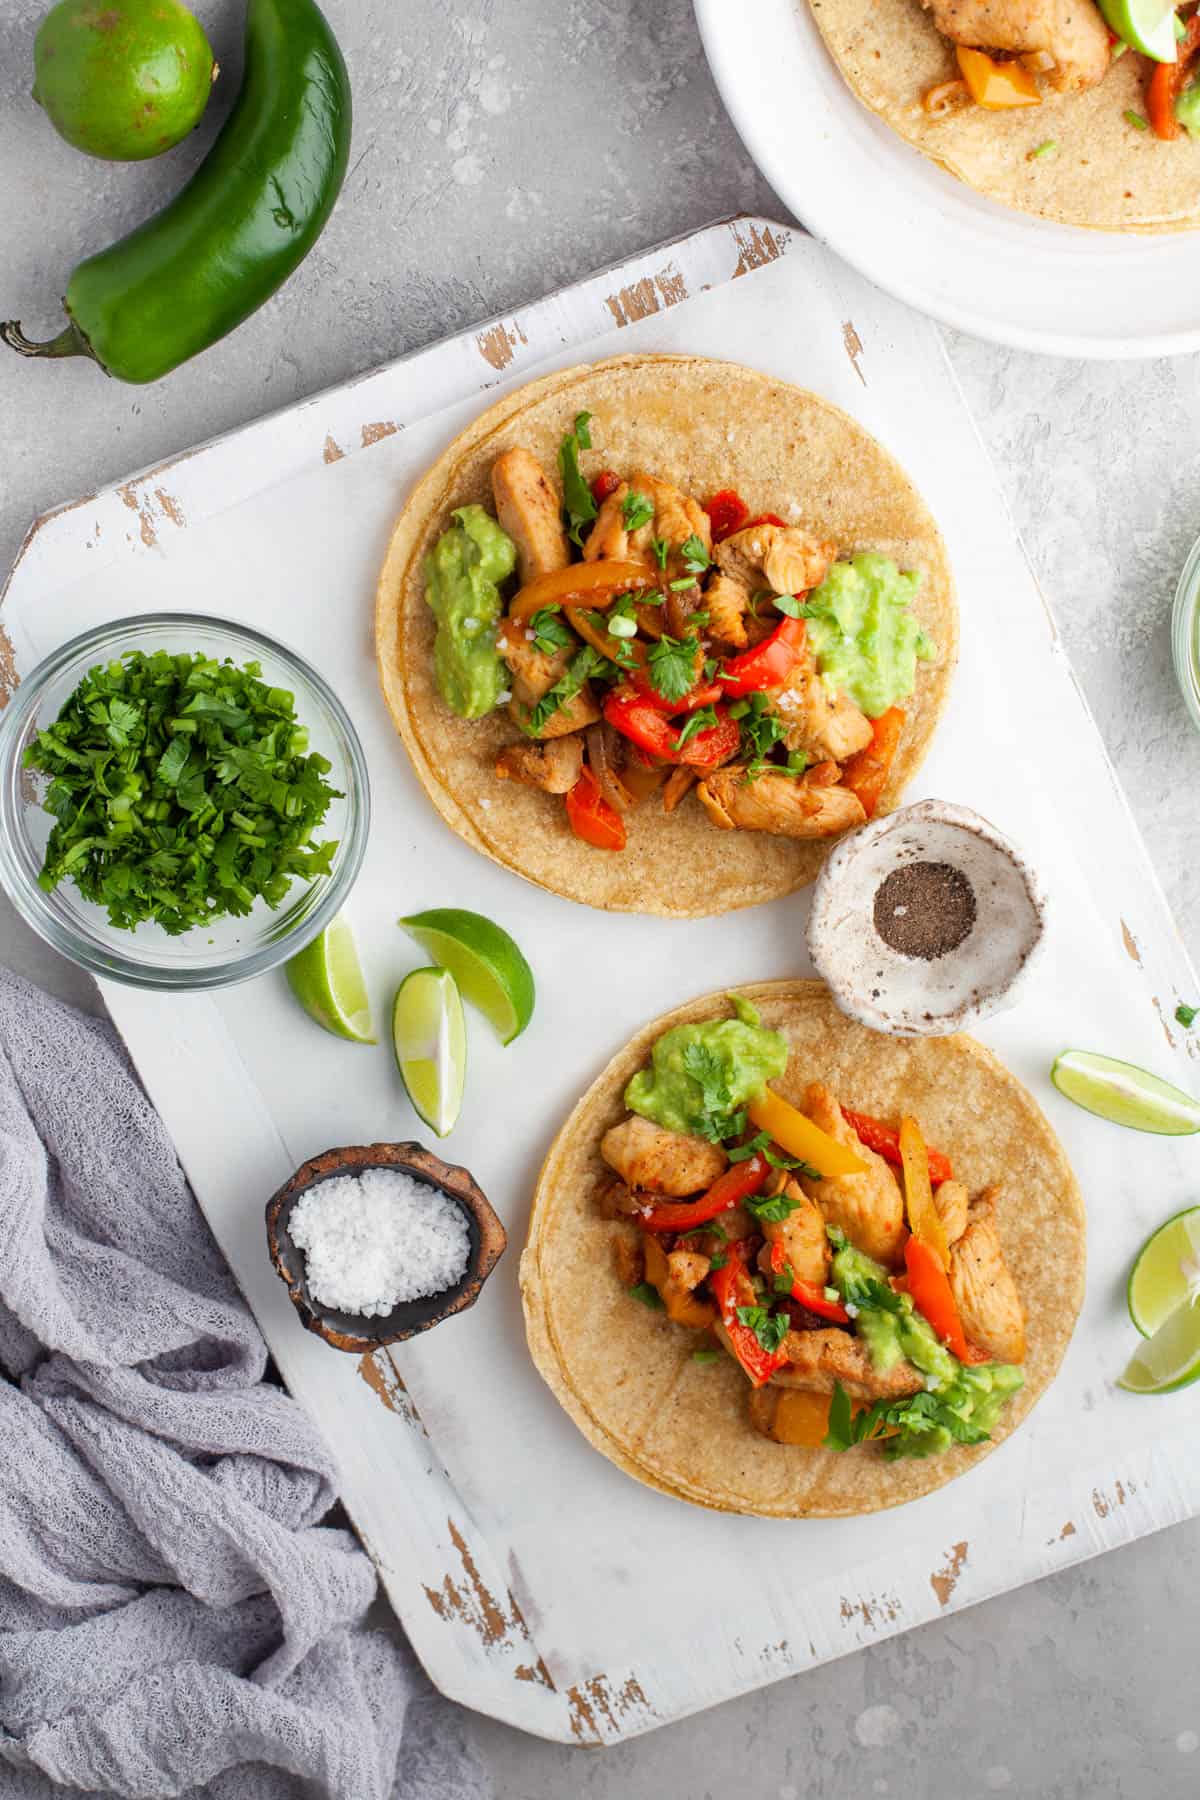 Chicken Fajitas on corn tortillas next to lime wedges, cilantro, and a jalapeno.